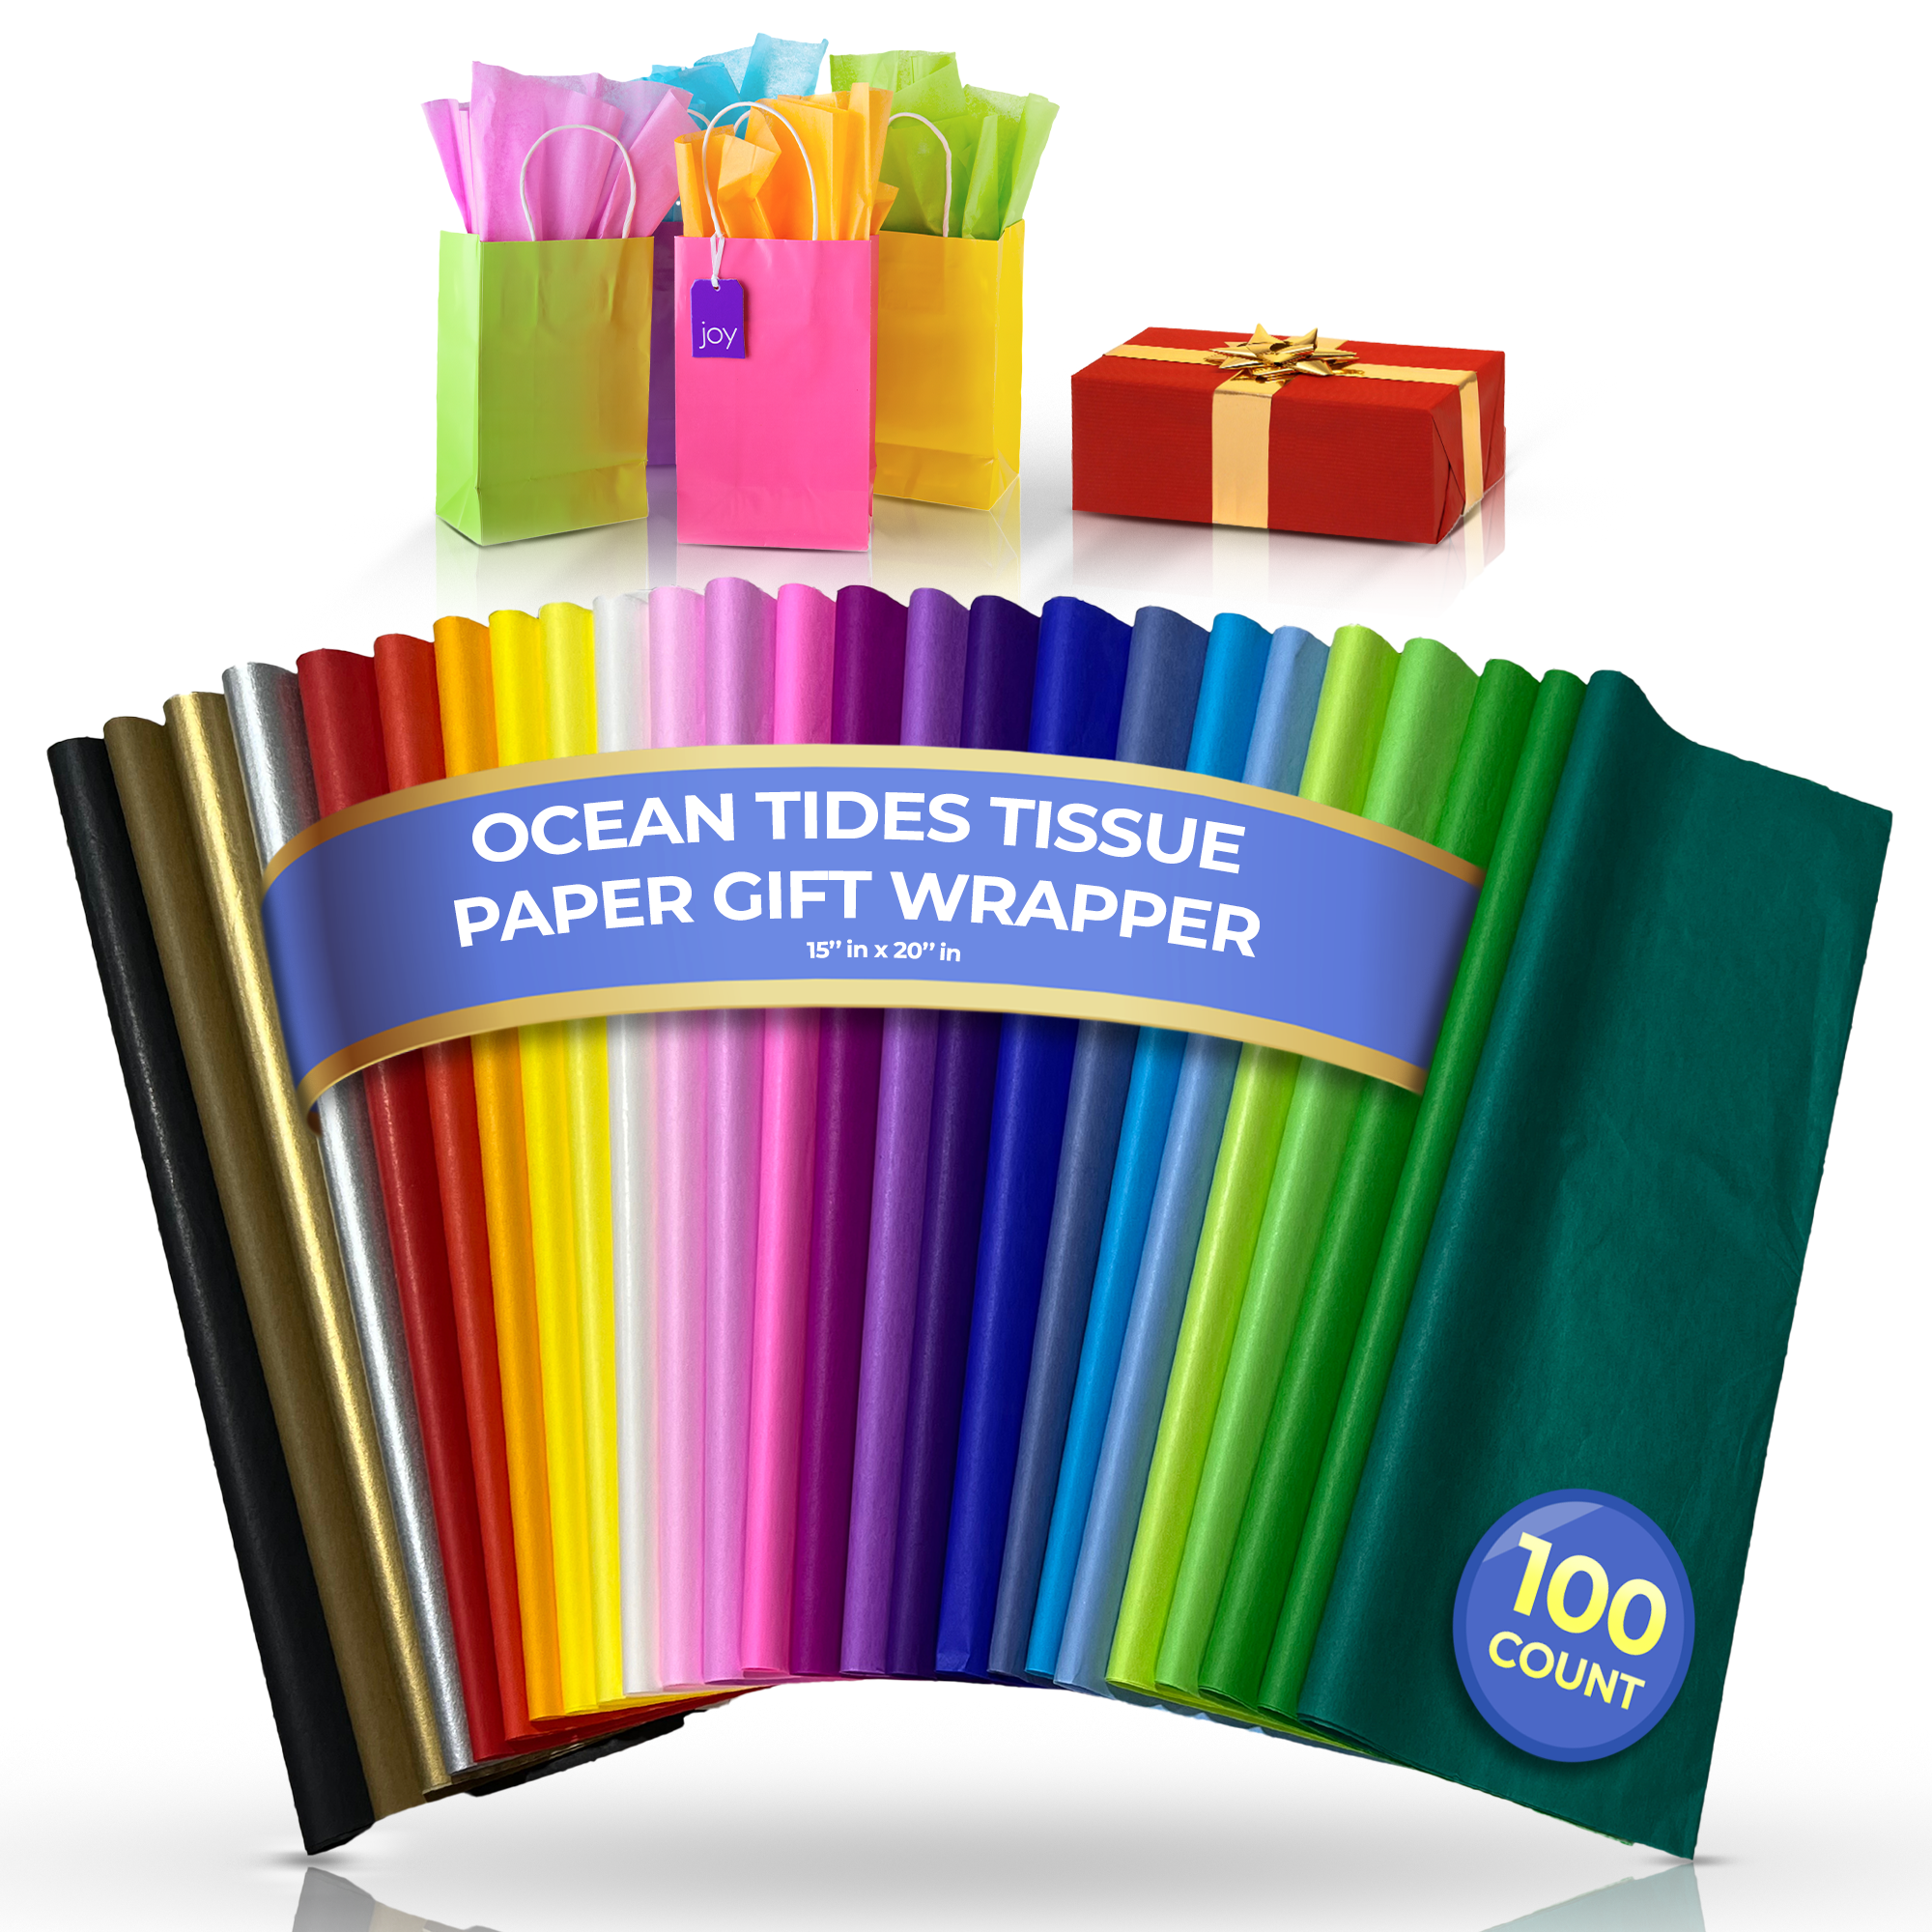  Waxed Tissue Paper